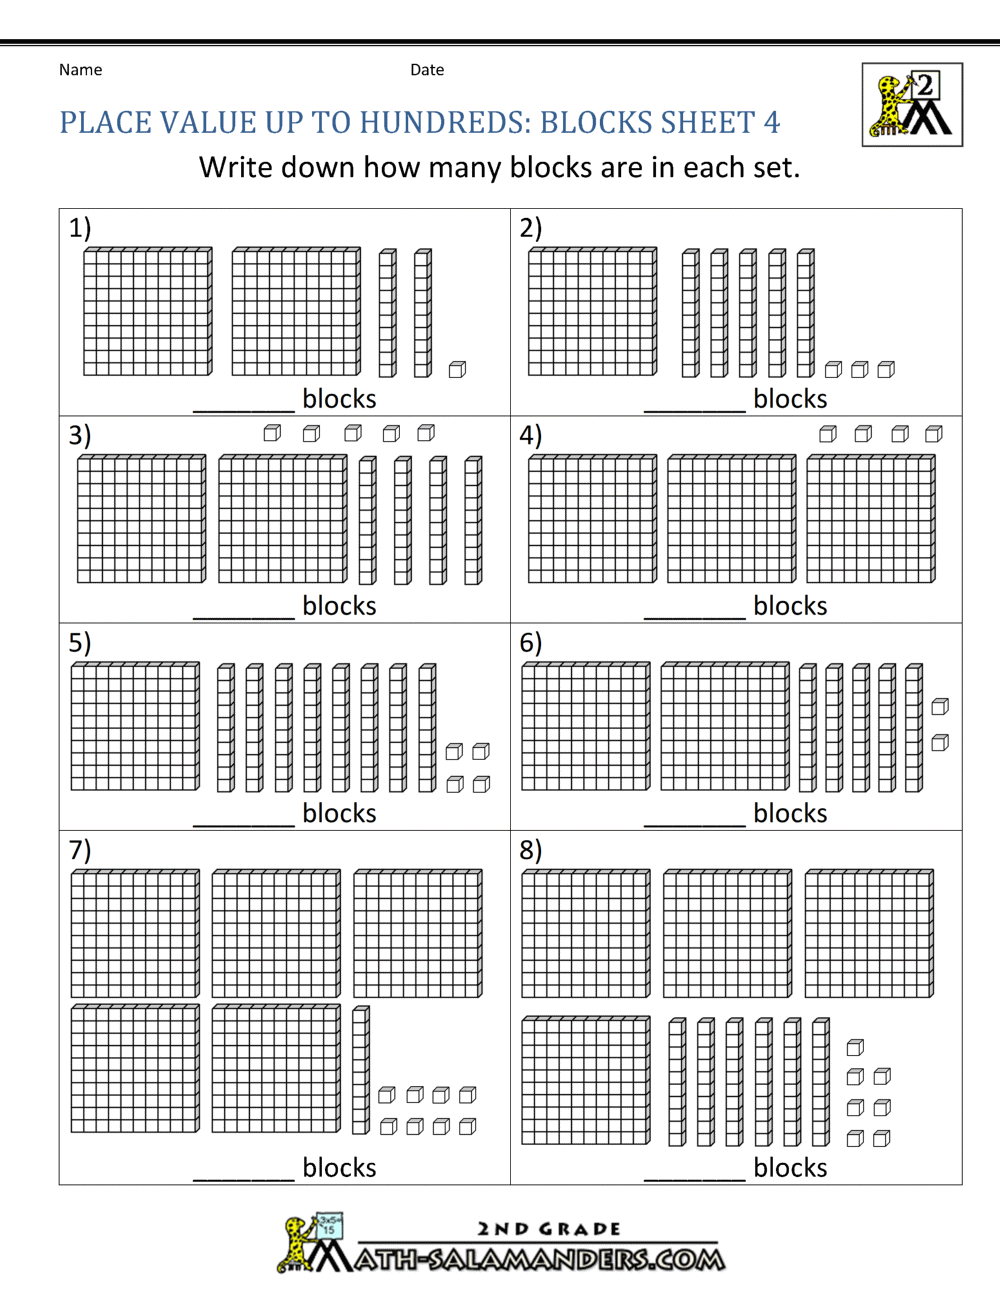 using-base-ten-blocks-worksheets-to-teach-math-in-2023-style-worksheets